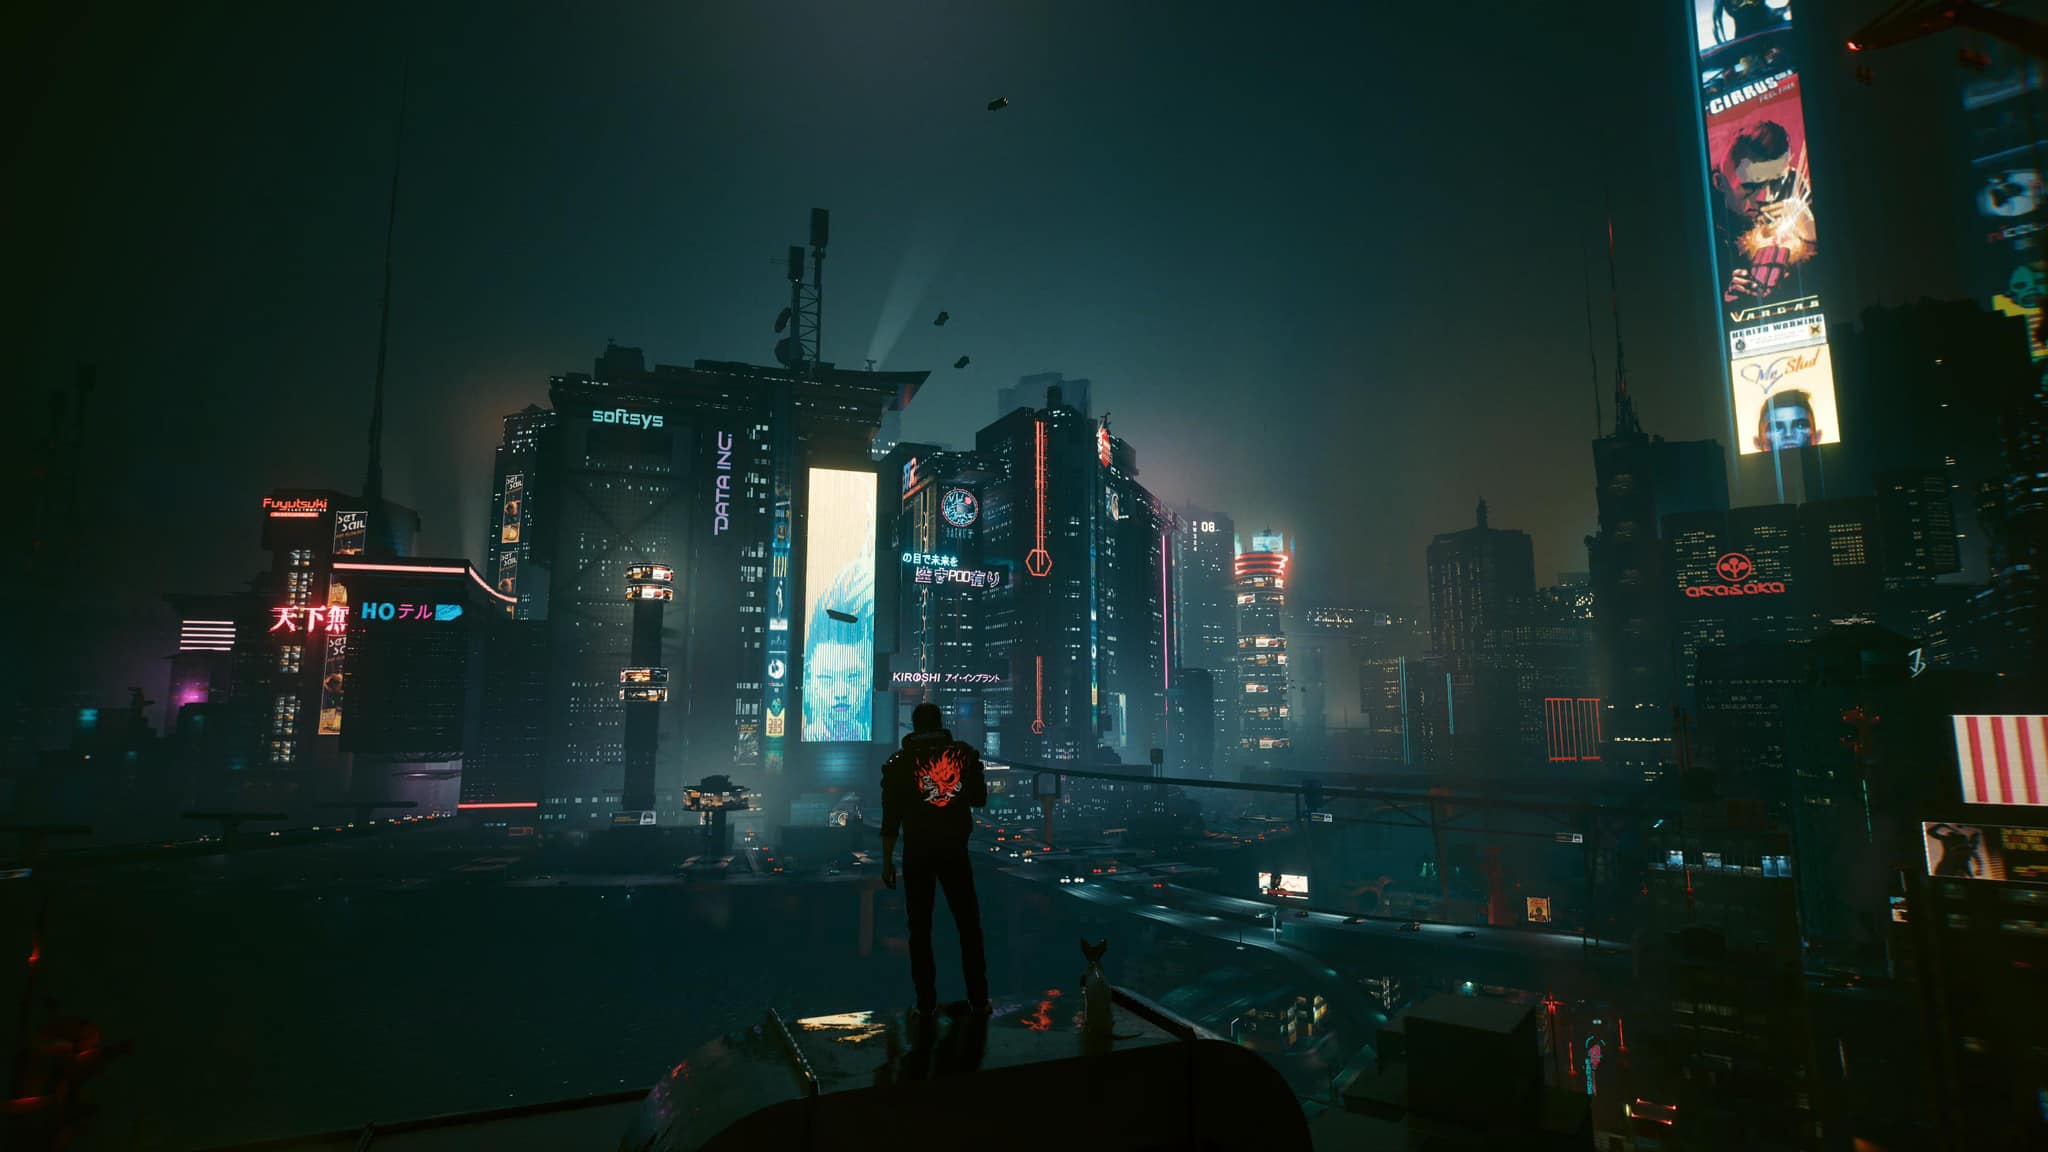 10+ V (Cyberpunk 2077) HD Wallpapers and Backgrounds